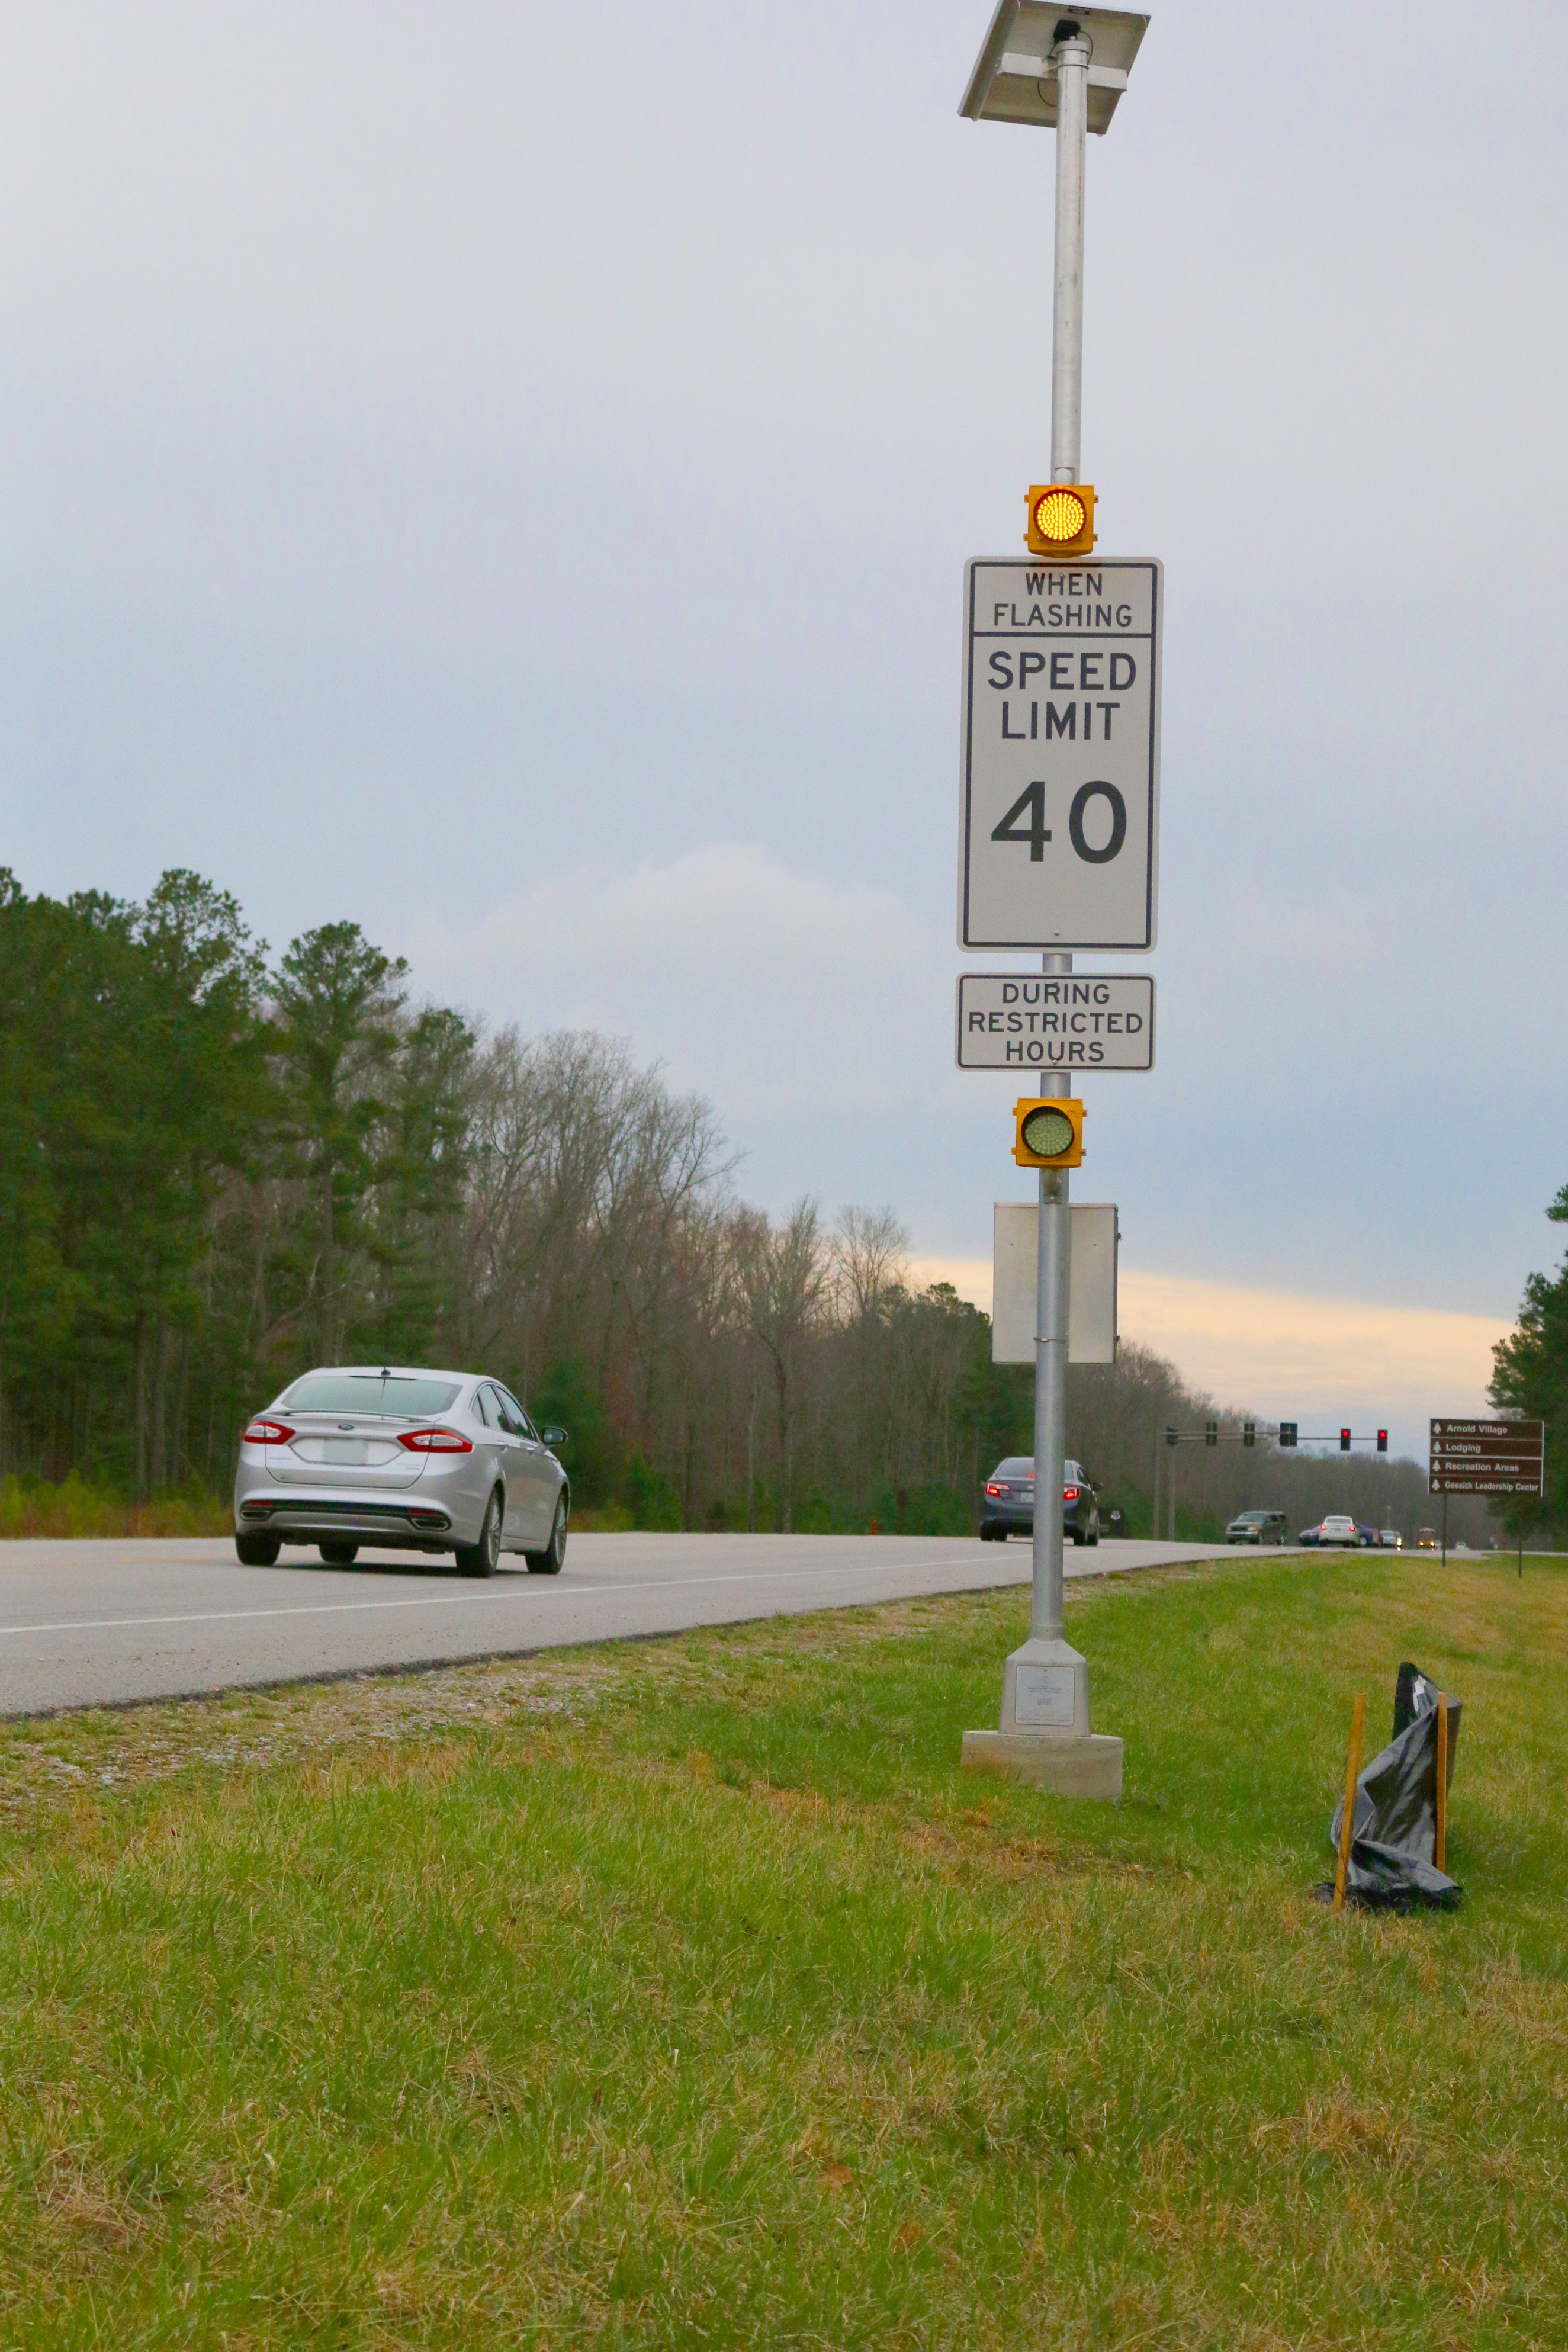 New gate zone speed limit notifications posted